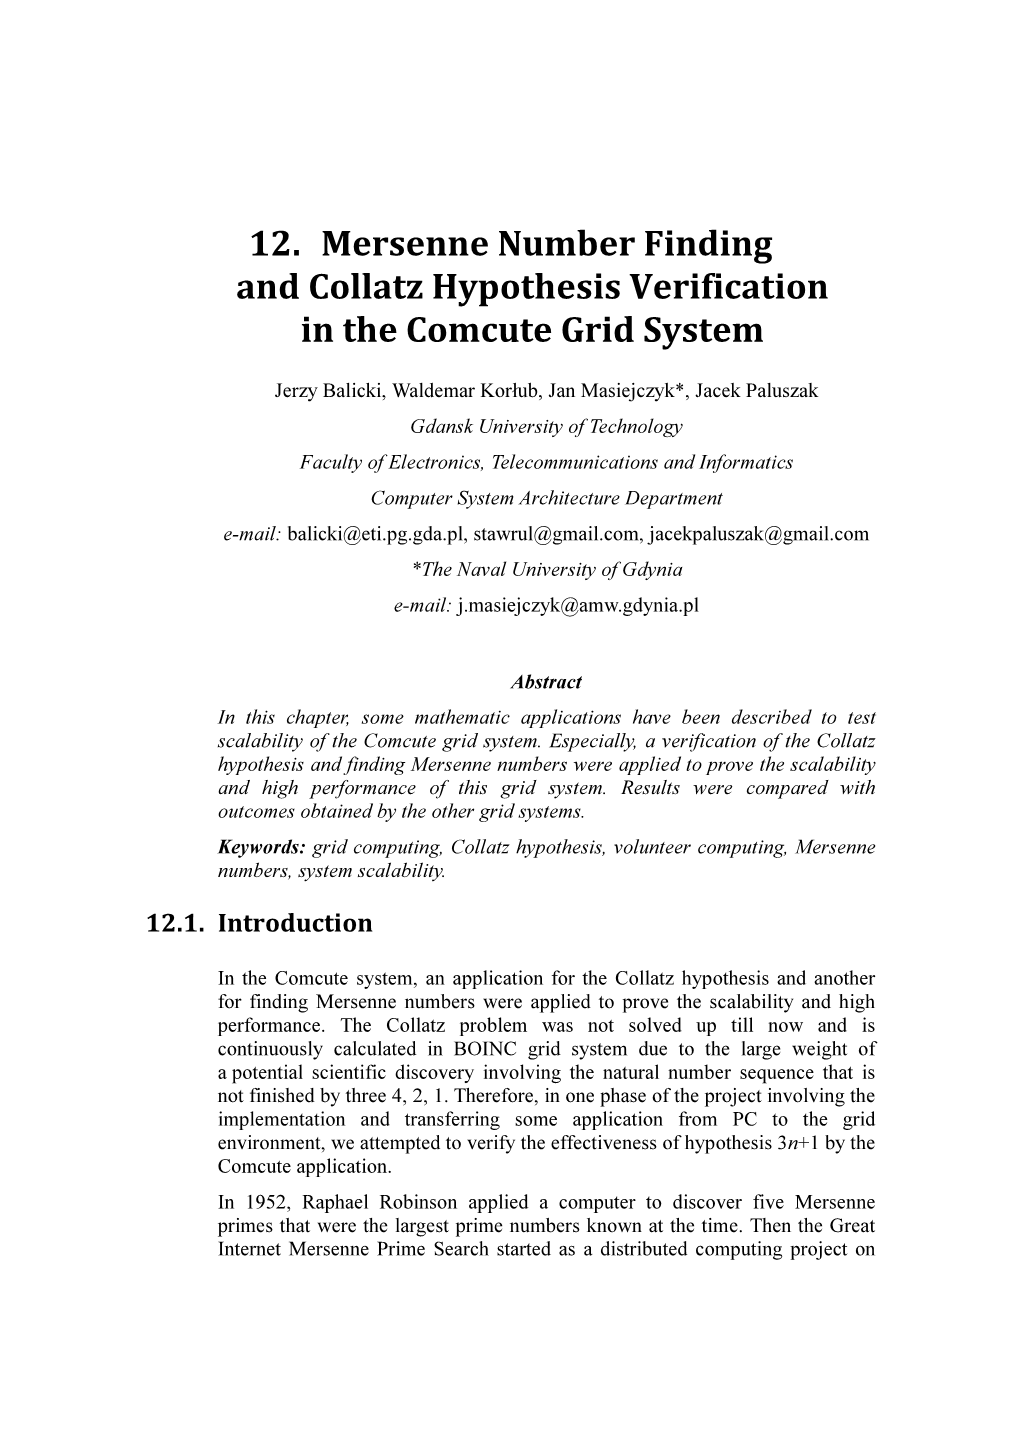 12. Mersenne Number Finding and Collatz Hypothesis Verification in the Comcute Grid System